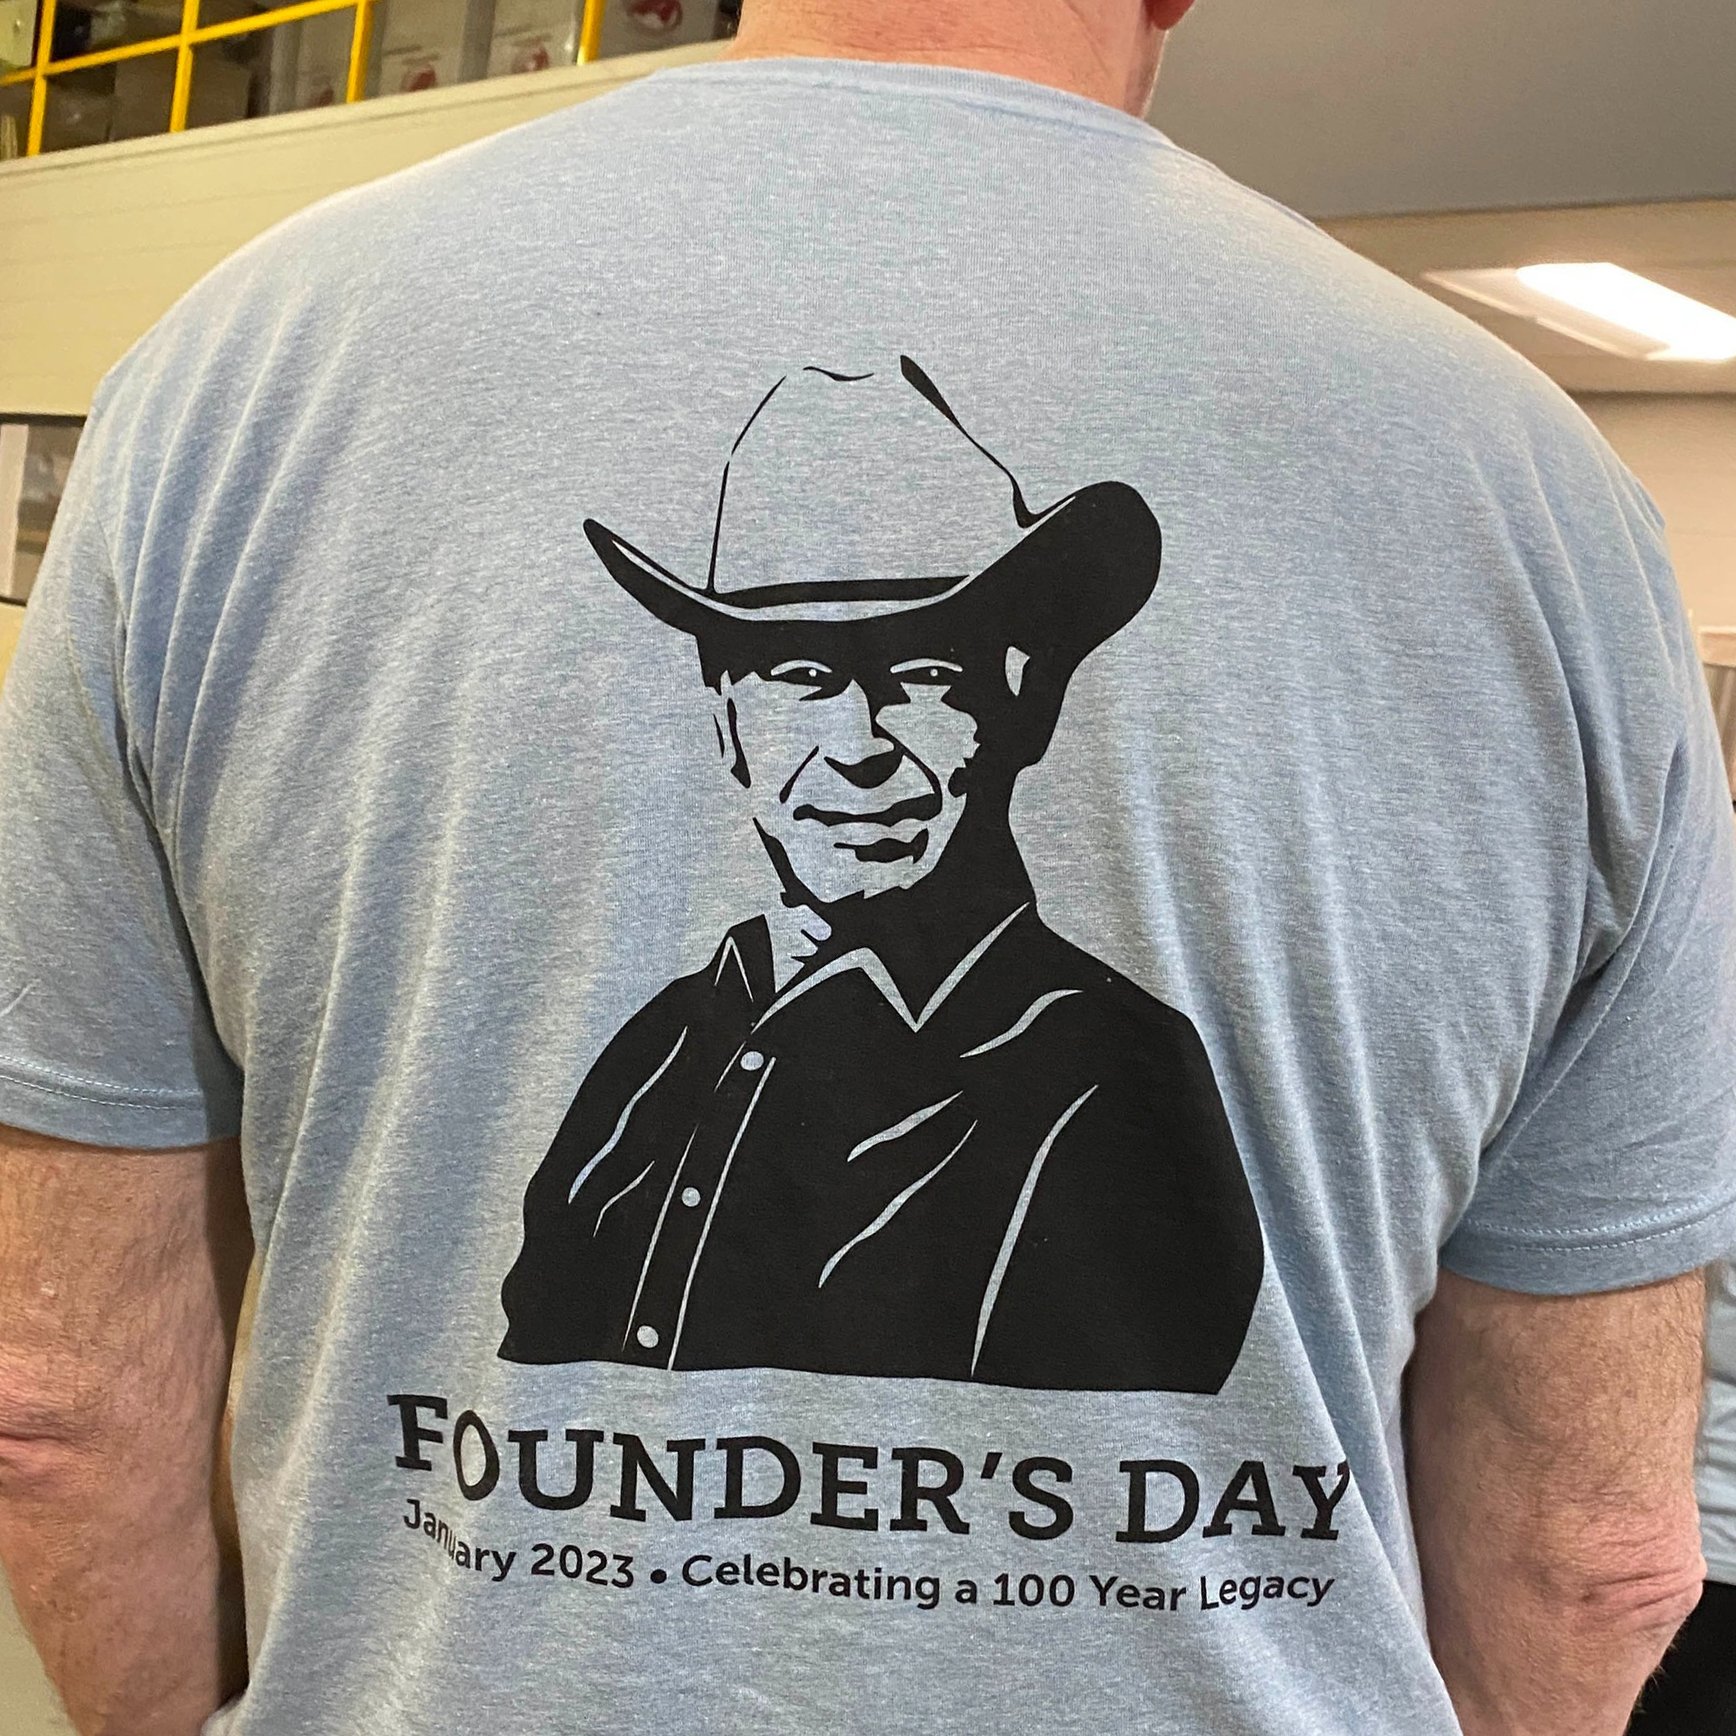 walker-founders-day-shirt-2023